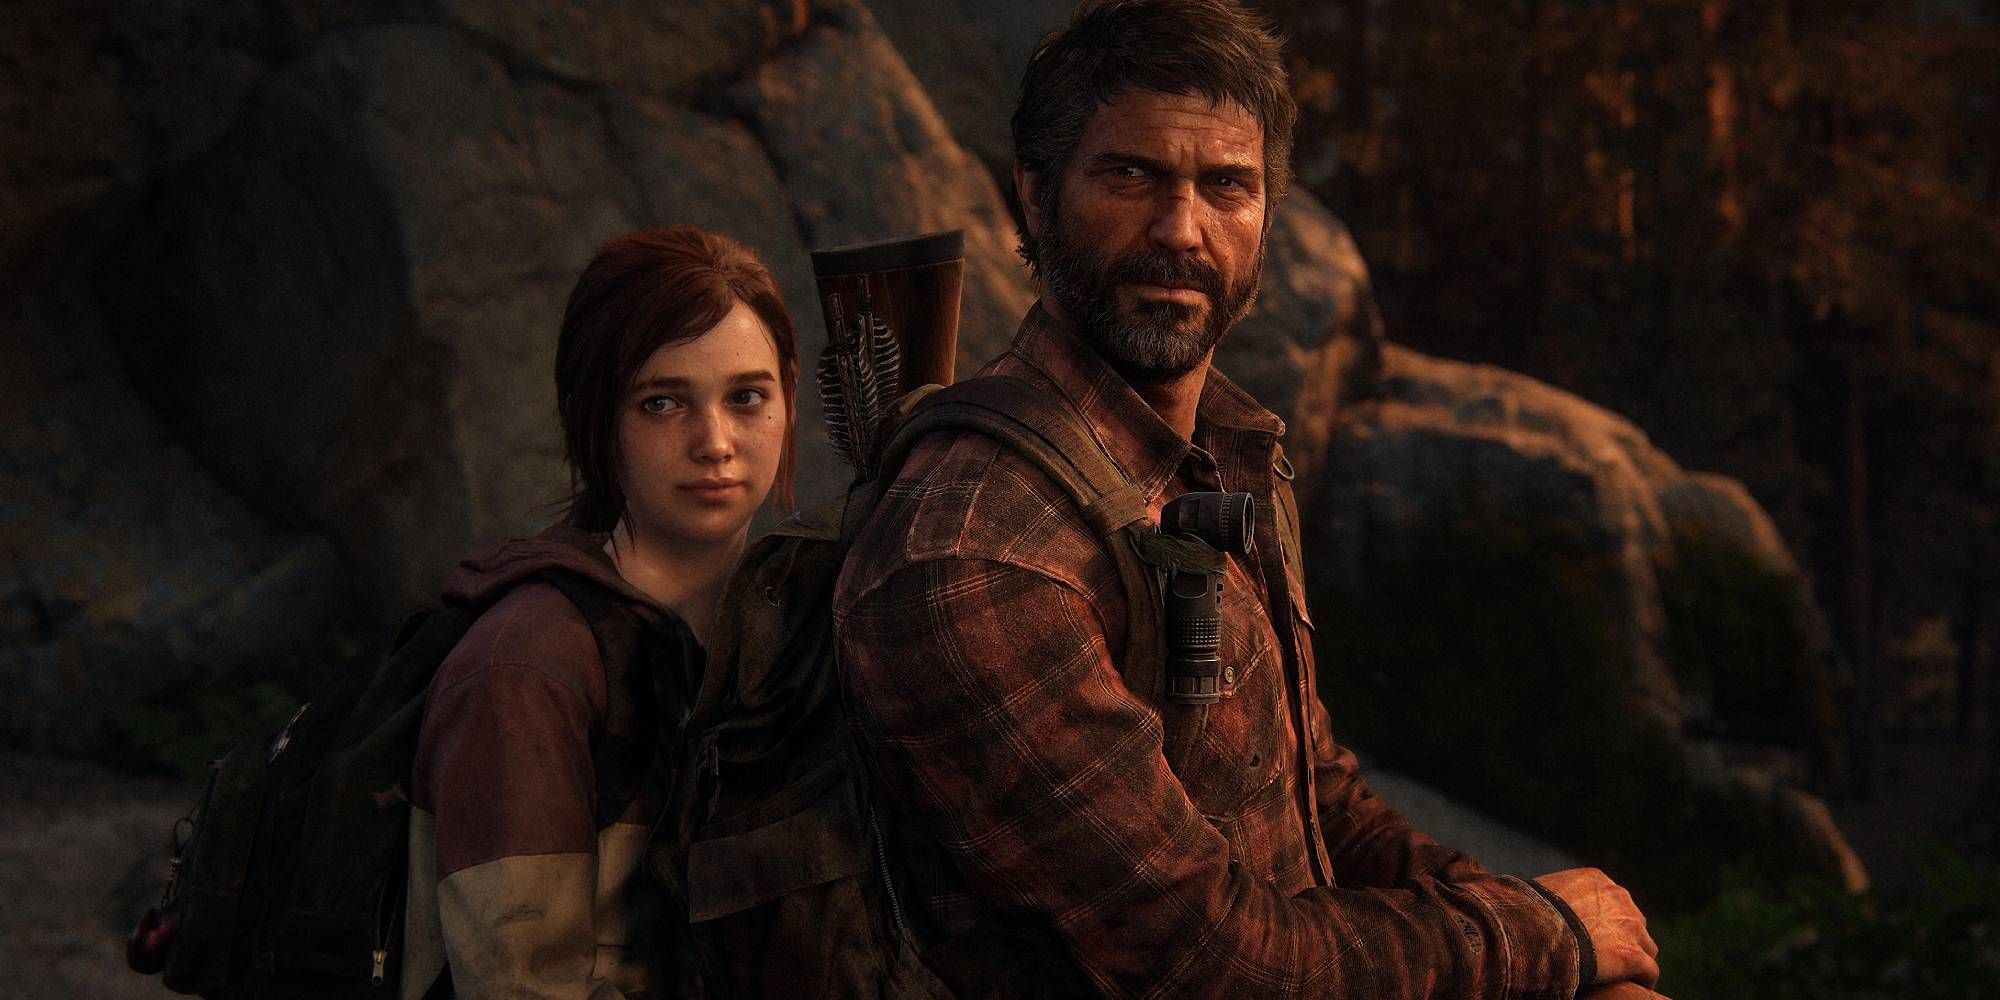 Joel and Ellie from The Last of Us are sitting on a horse